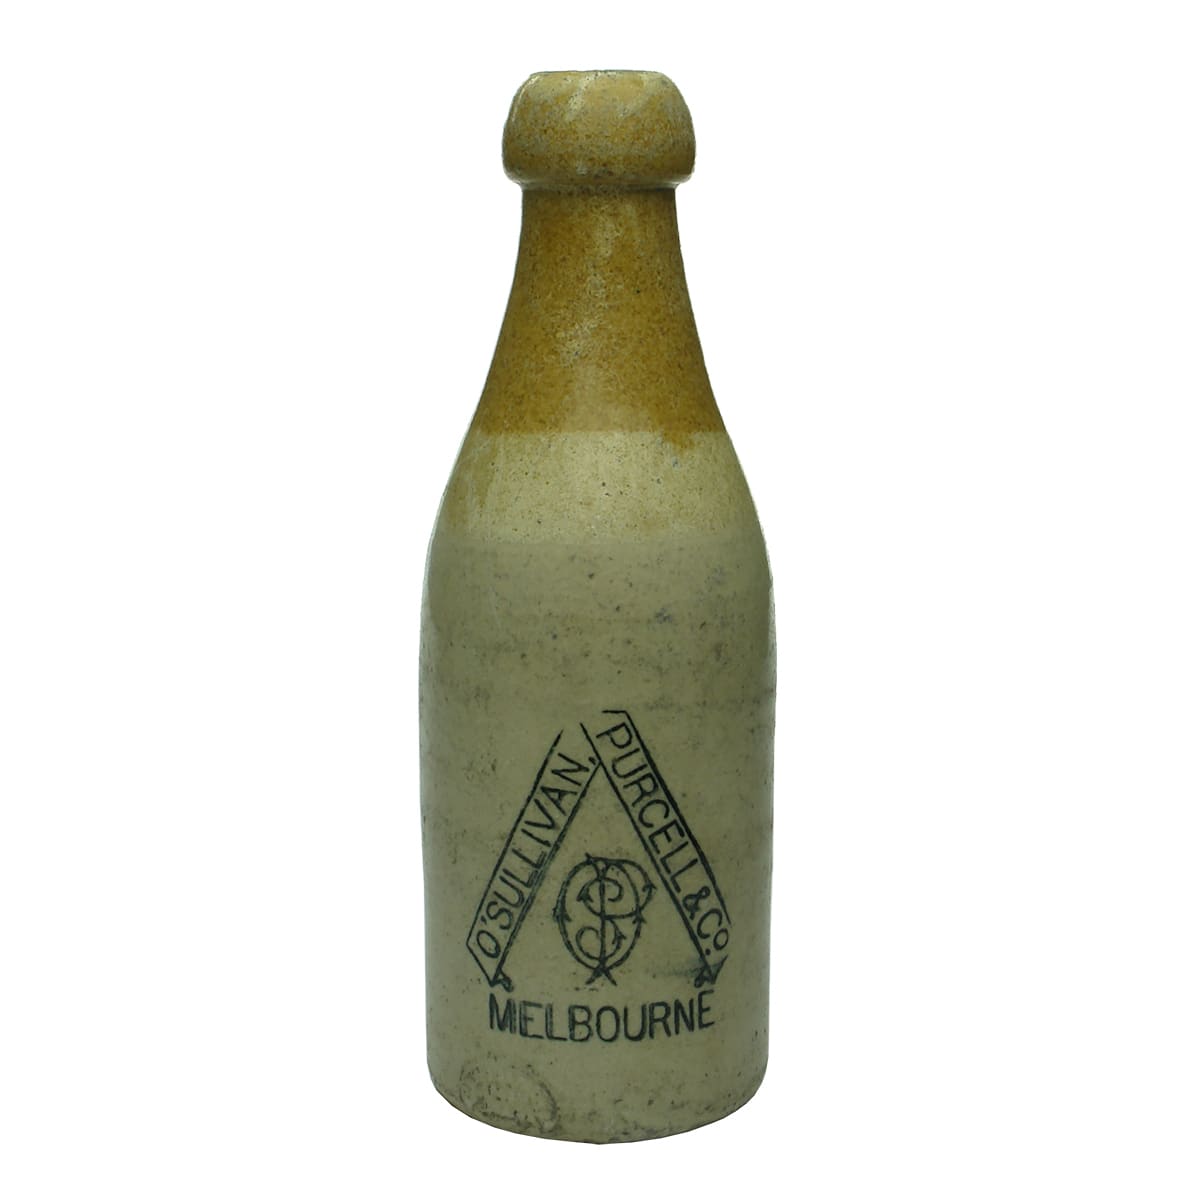 Ginger Beer. O'Sullivan, Purcell & Co., Melbourne. Champagne. Blob Top. Tan Top. 10 oz.